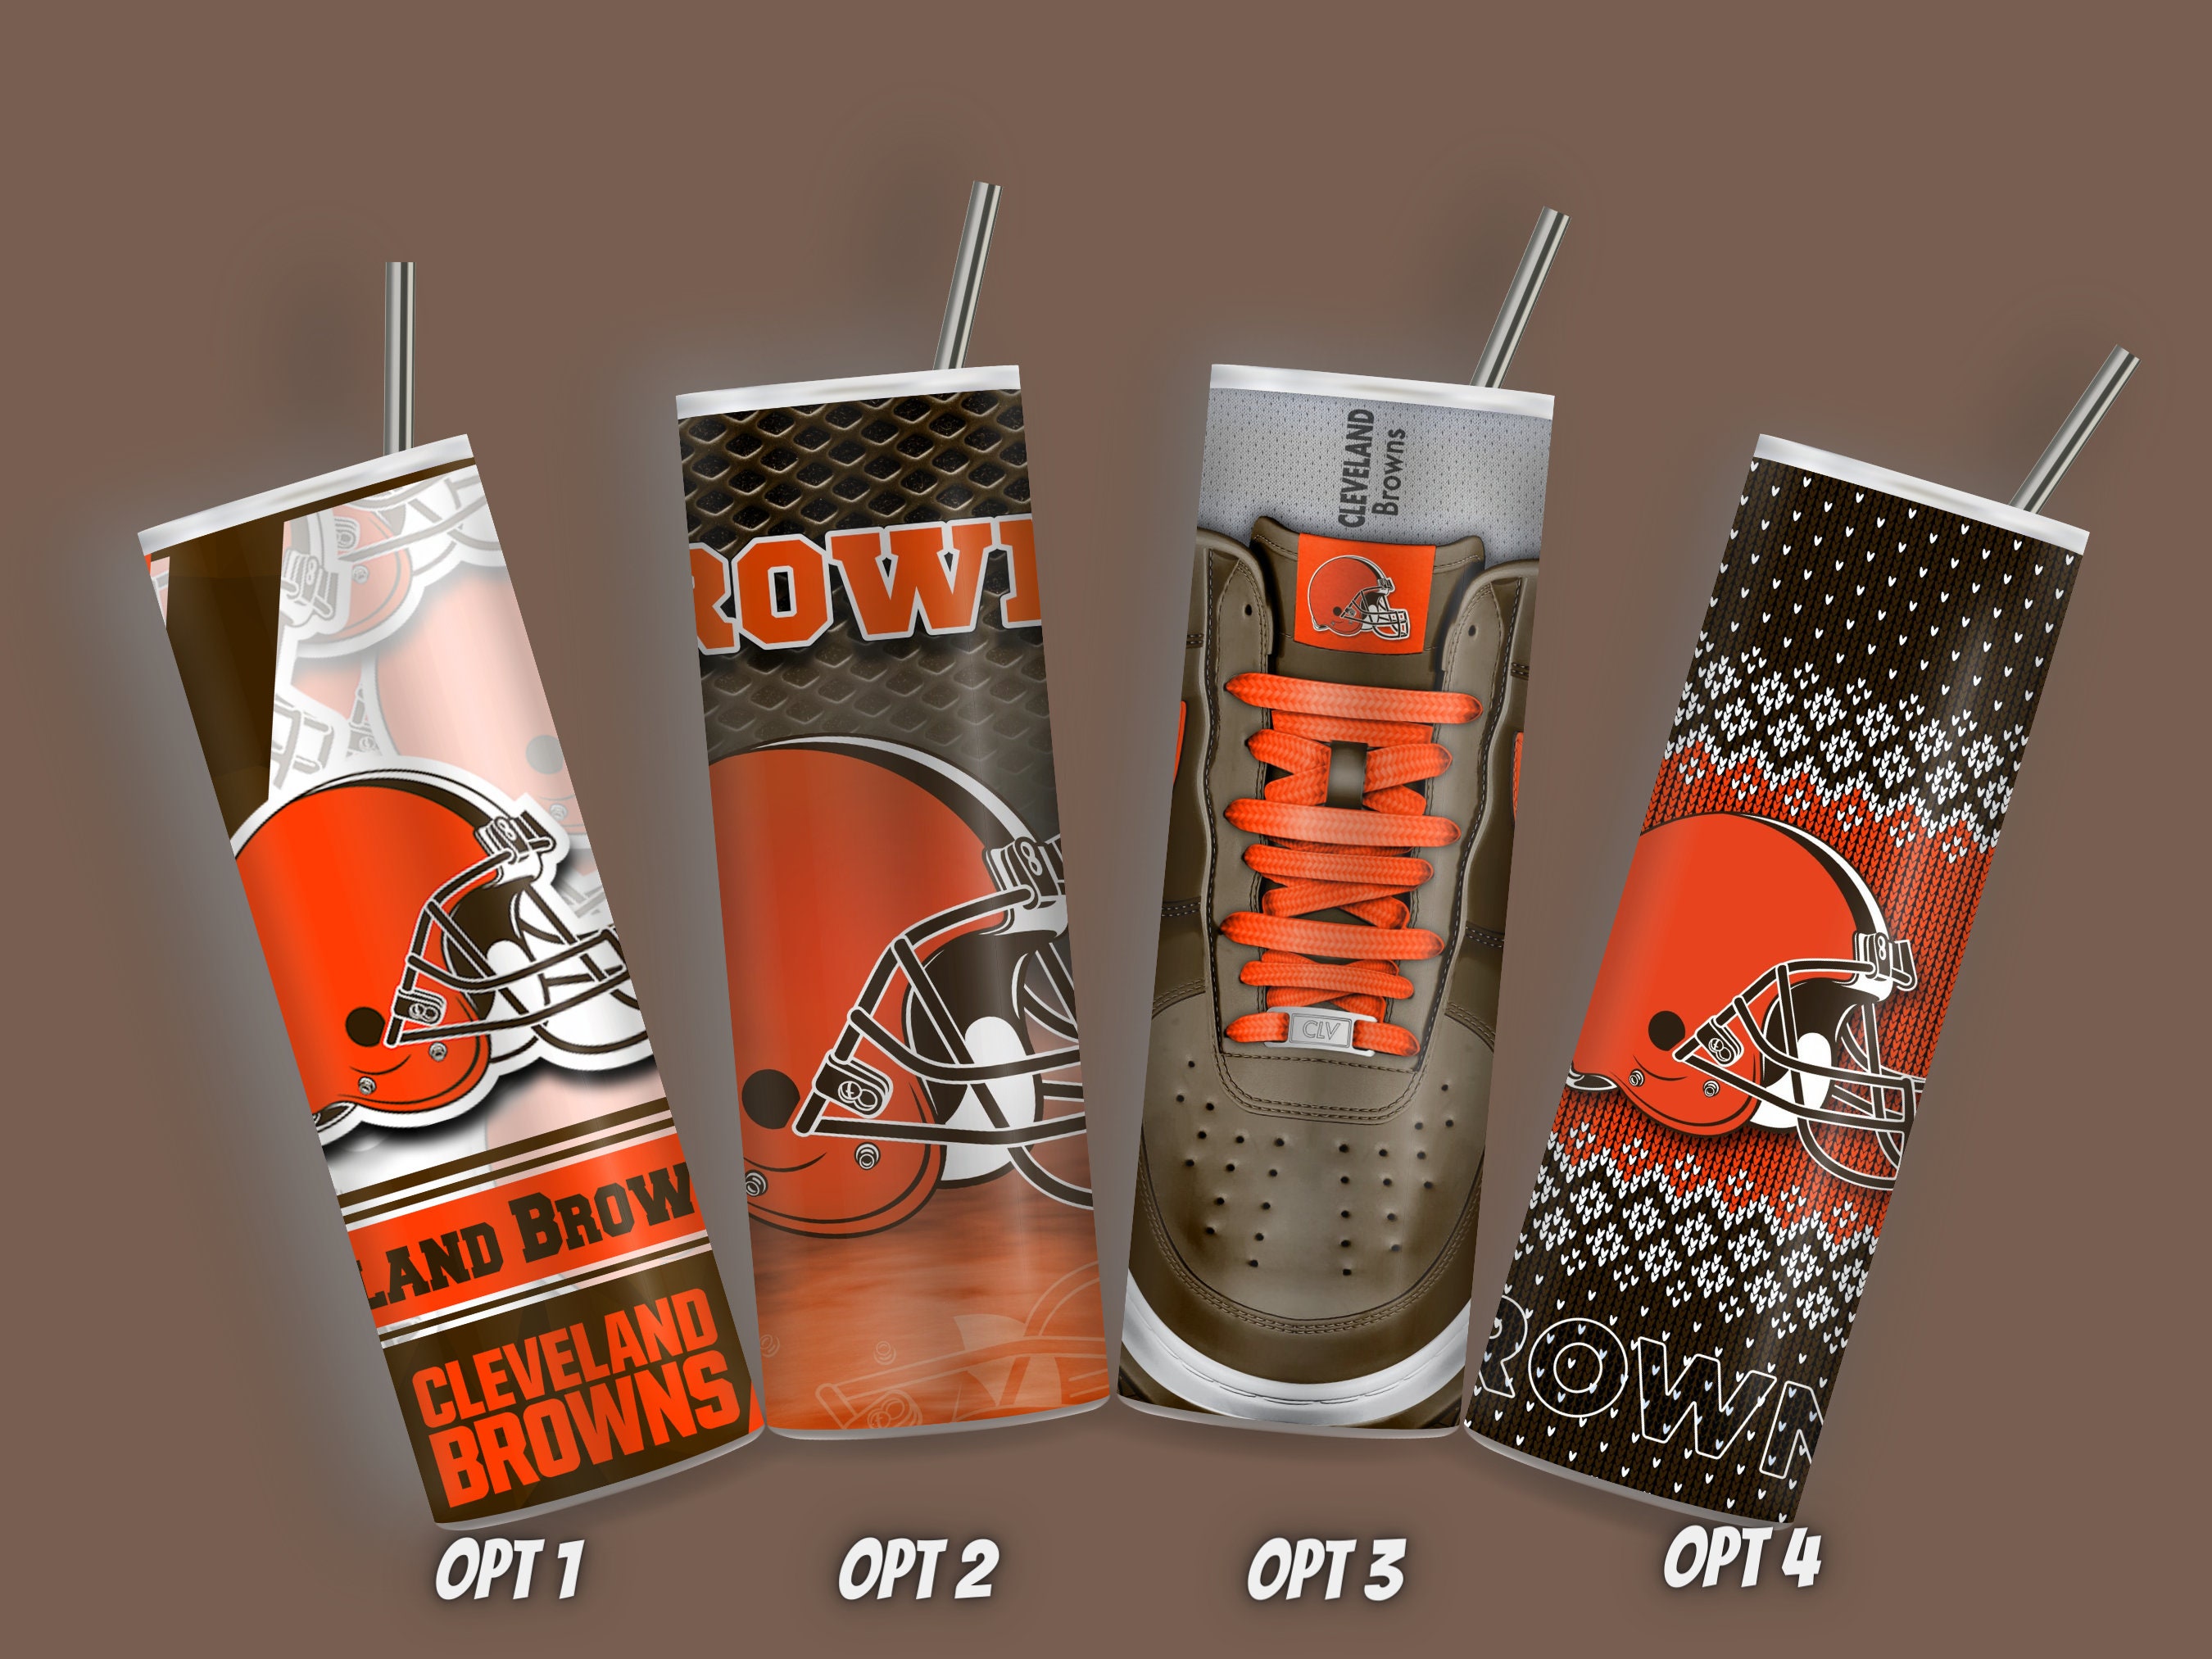 CLEVELAND BROWNS BROWNS I Love the Cleveland Browns & the Word